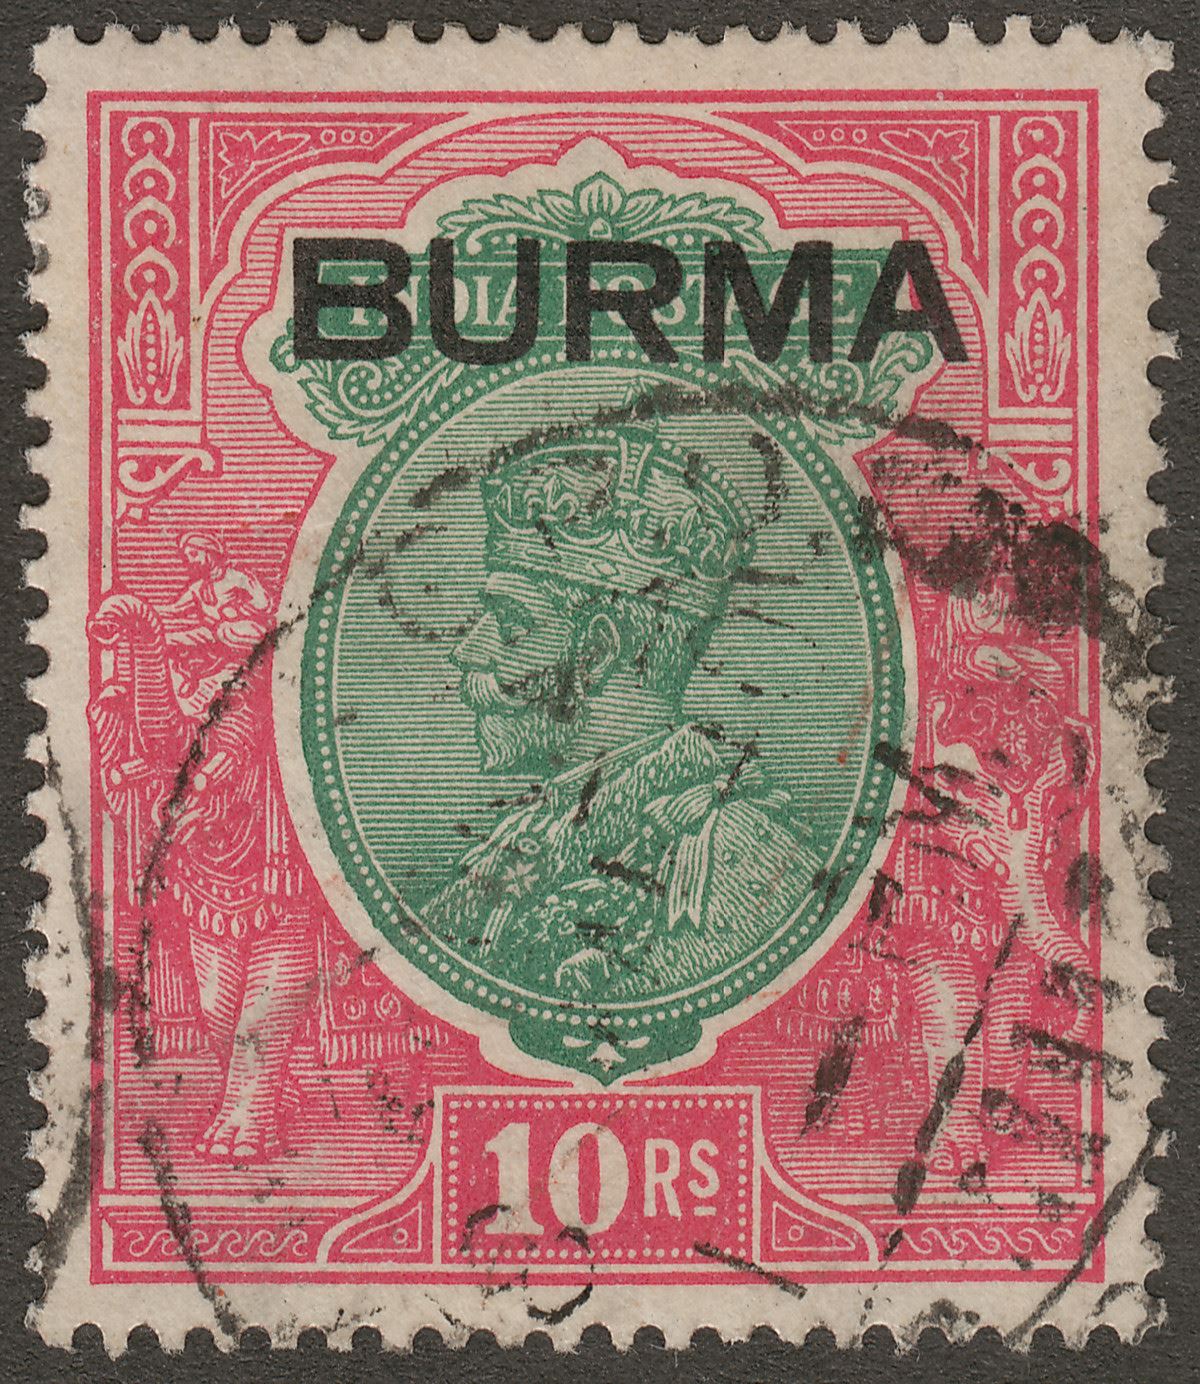 Burma 1937 KGV Overprint on India 10r Green and Scarlet Used SG16 cat £100